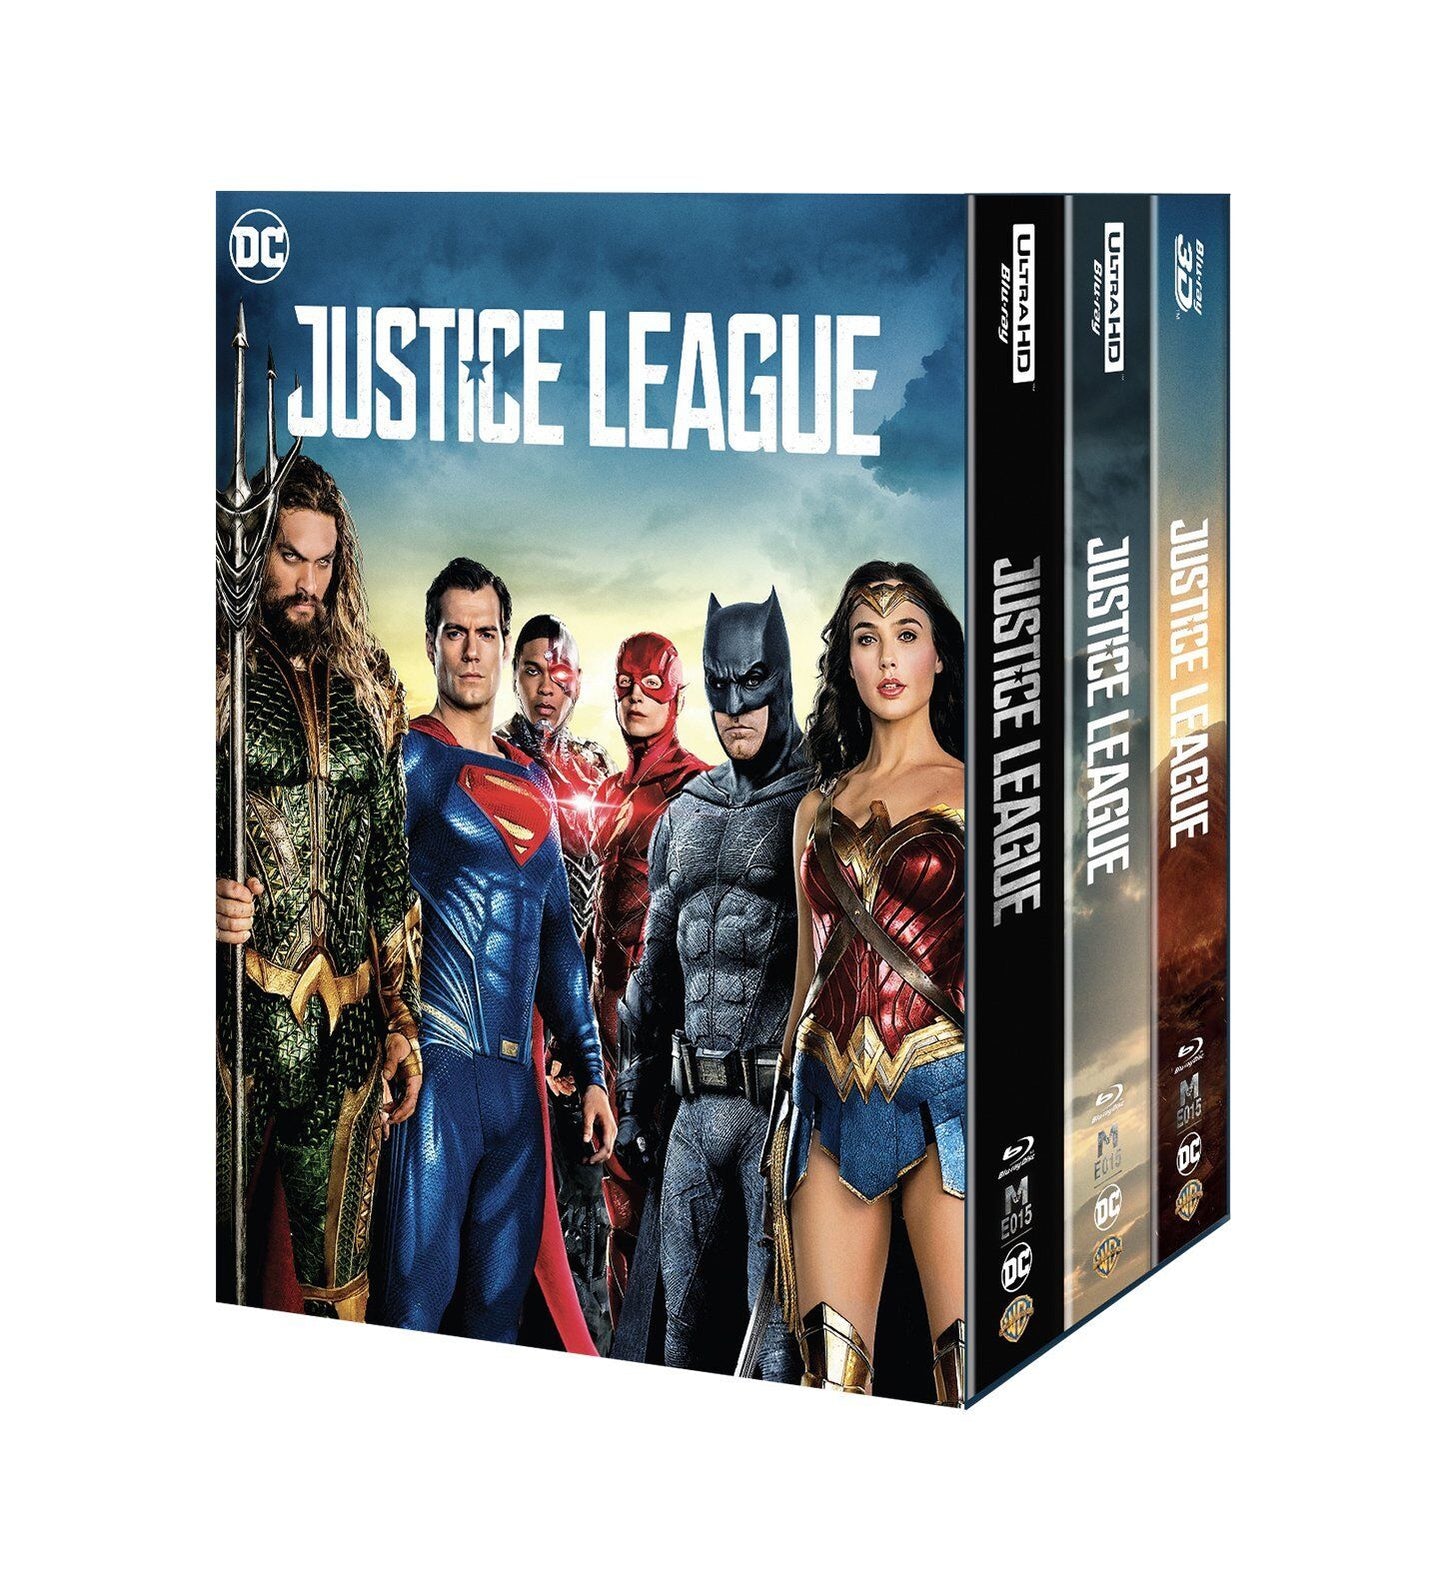 Justice League 4K+3D Blu-ray Steelbook Manta Lab Exclusive ME#15 One Click Box Set *LOW NUMBER*